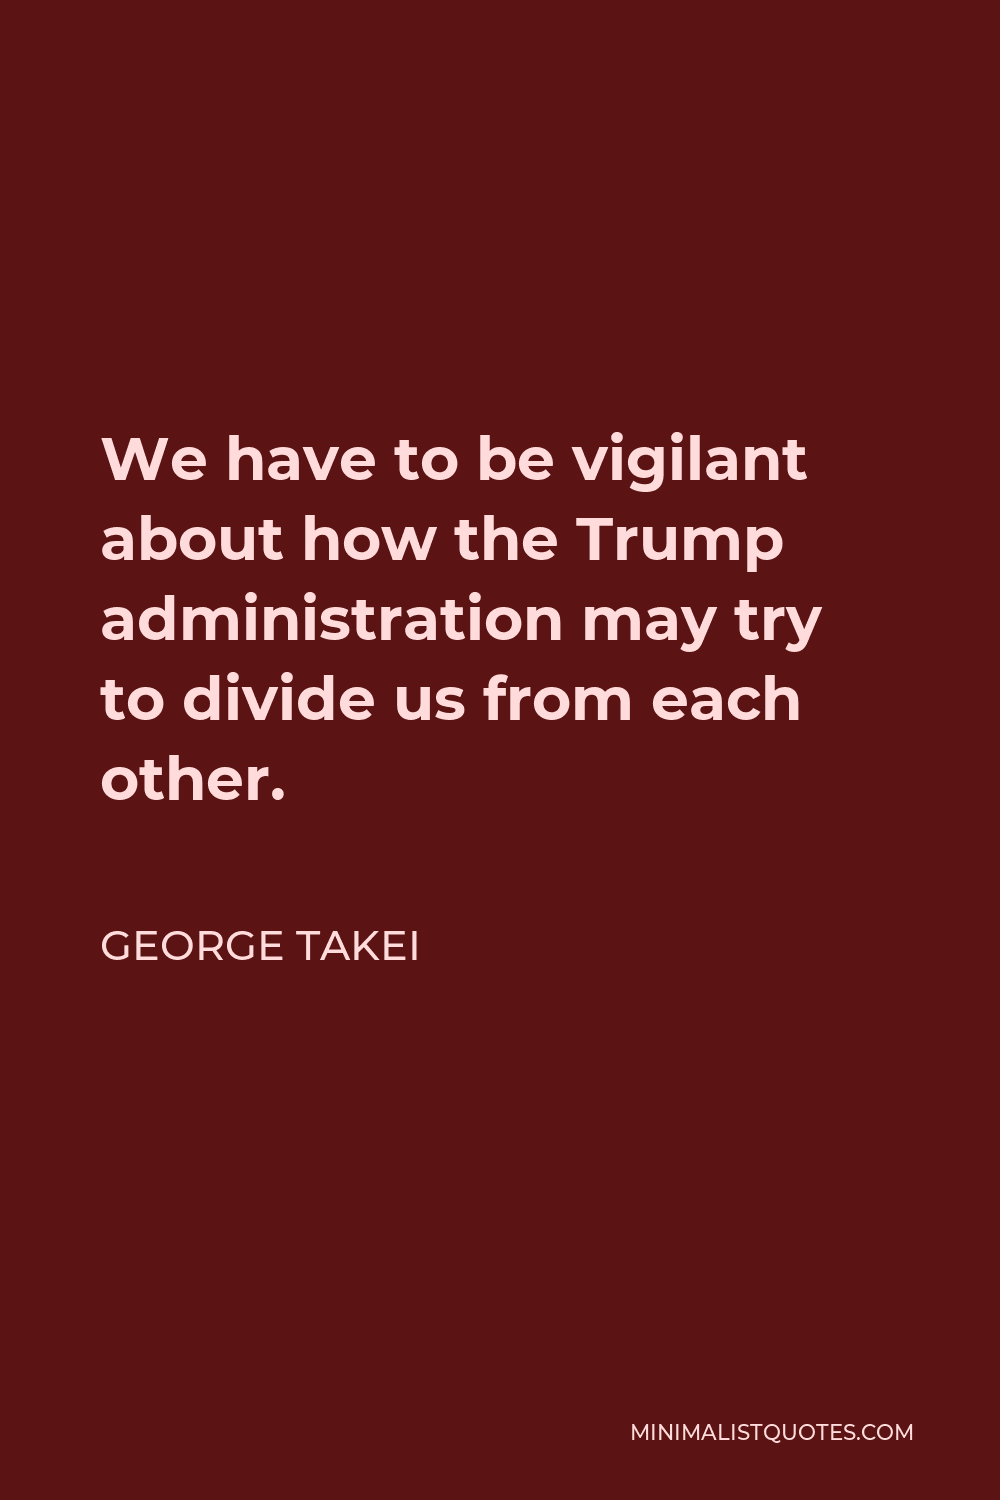 George Takei Quote - We have to be vigilant about how the Trump administration may try to divide us from each other.